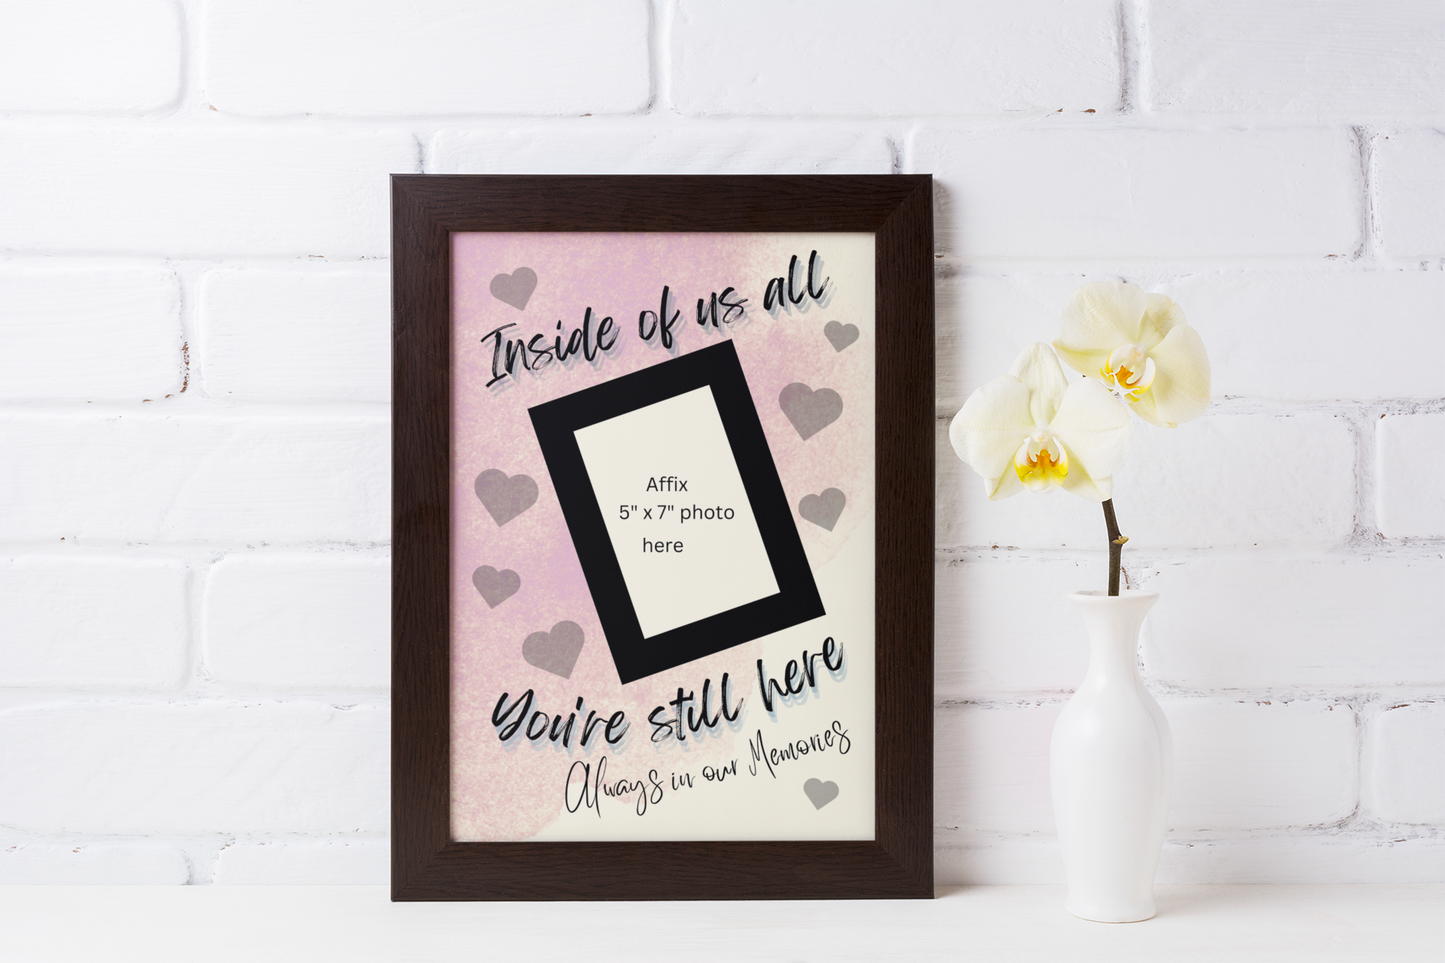 MEMORY of a LOVED ONE - QUIRKY UNIQUE WALL ART in PINK tones, featuring heartfelt words of love to remember them always.